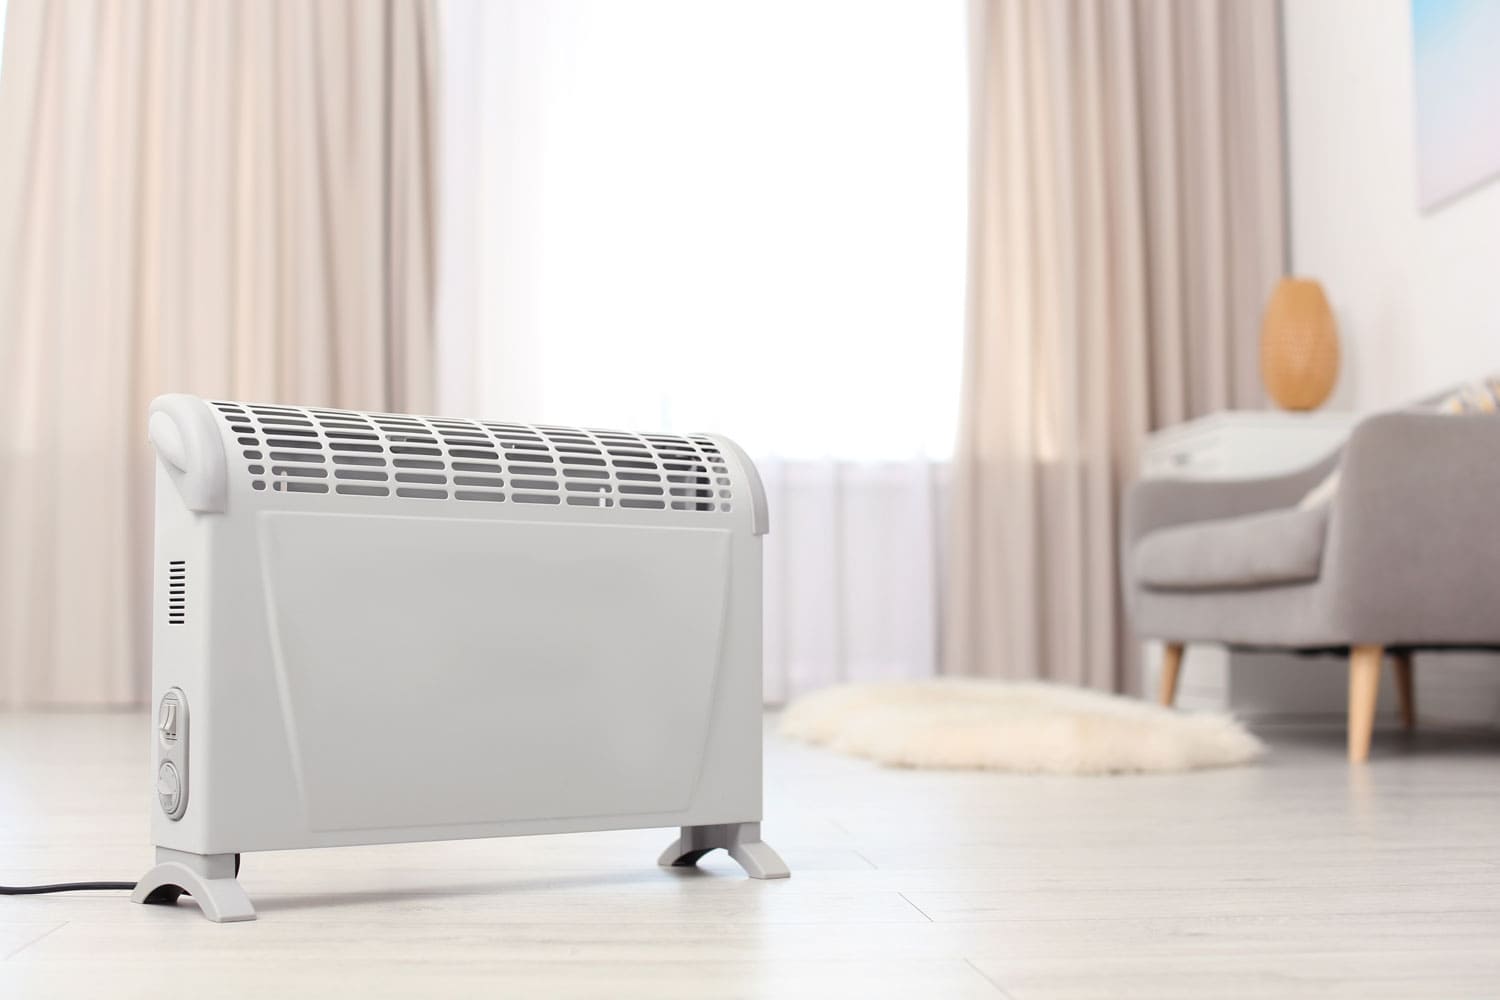 Electric space heater inside a white room